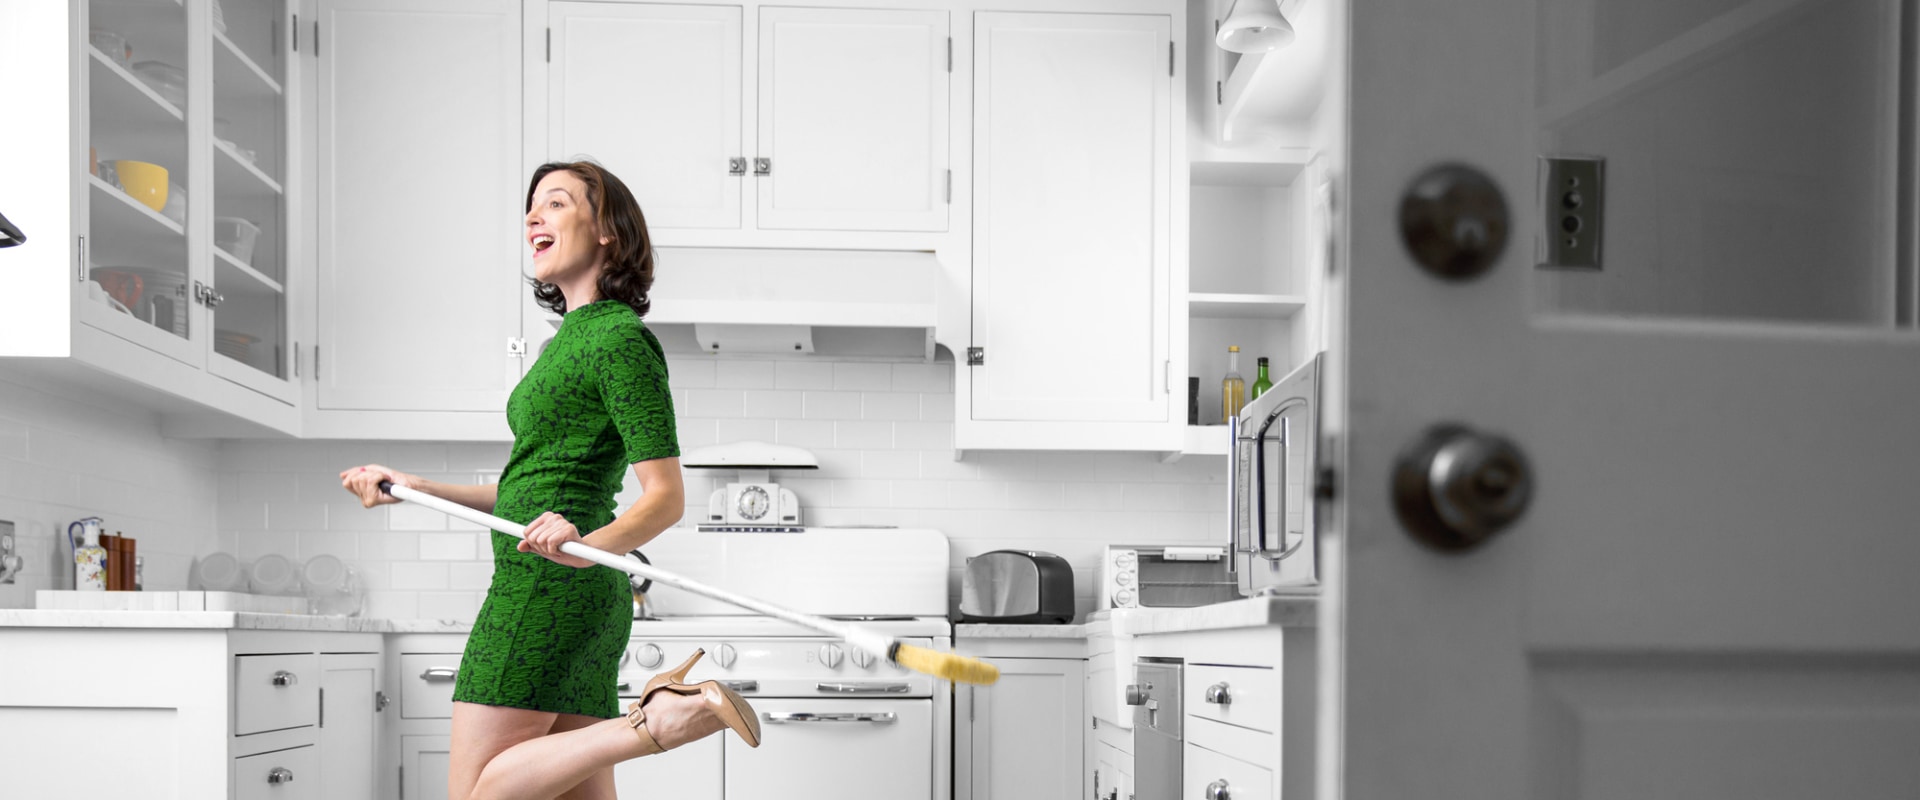 What are the physical health benefits of regular house cleaning?